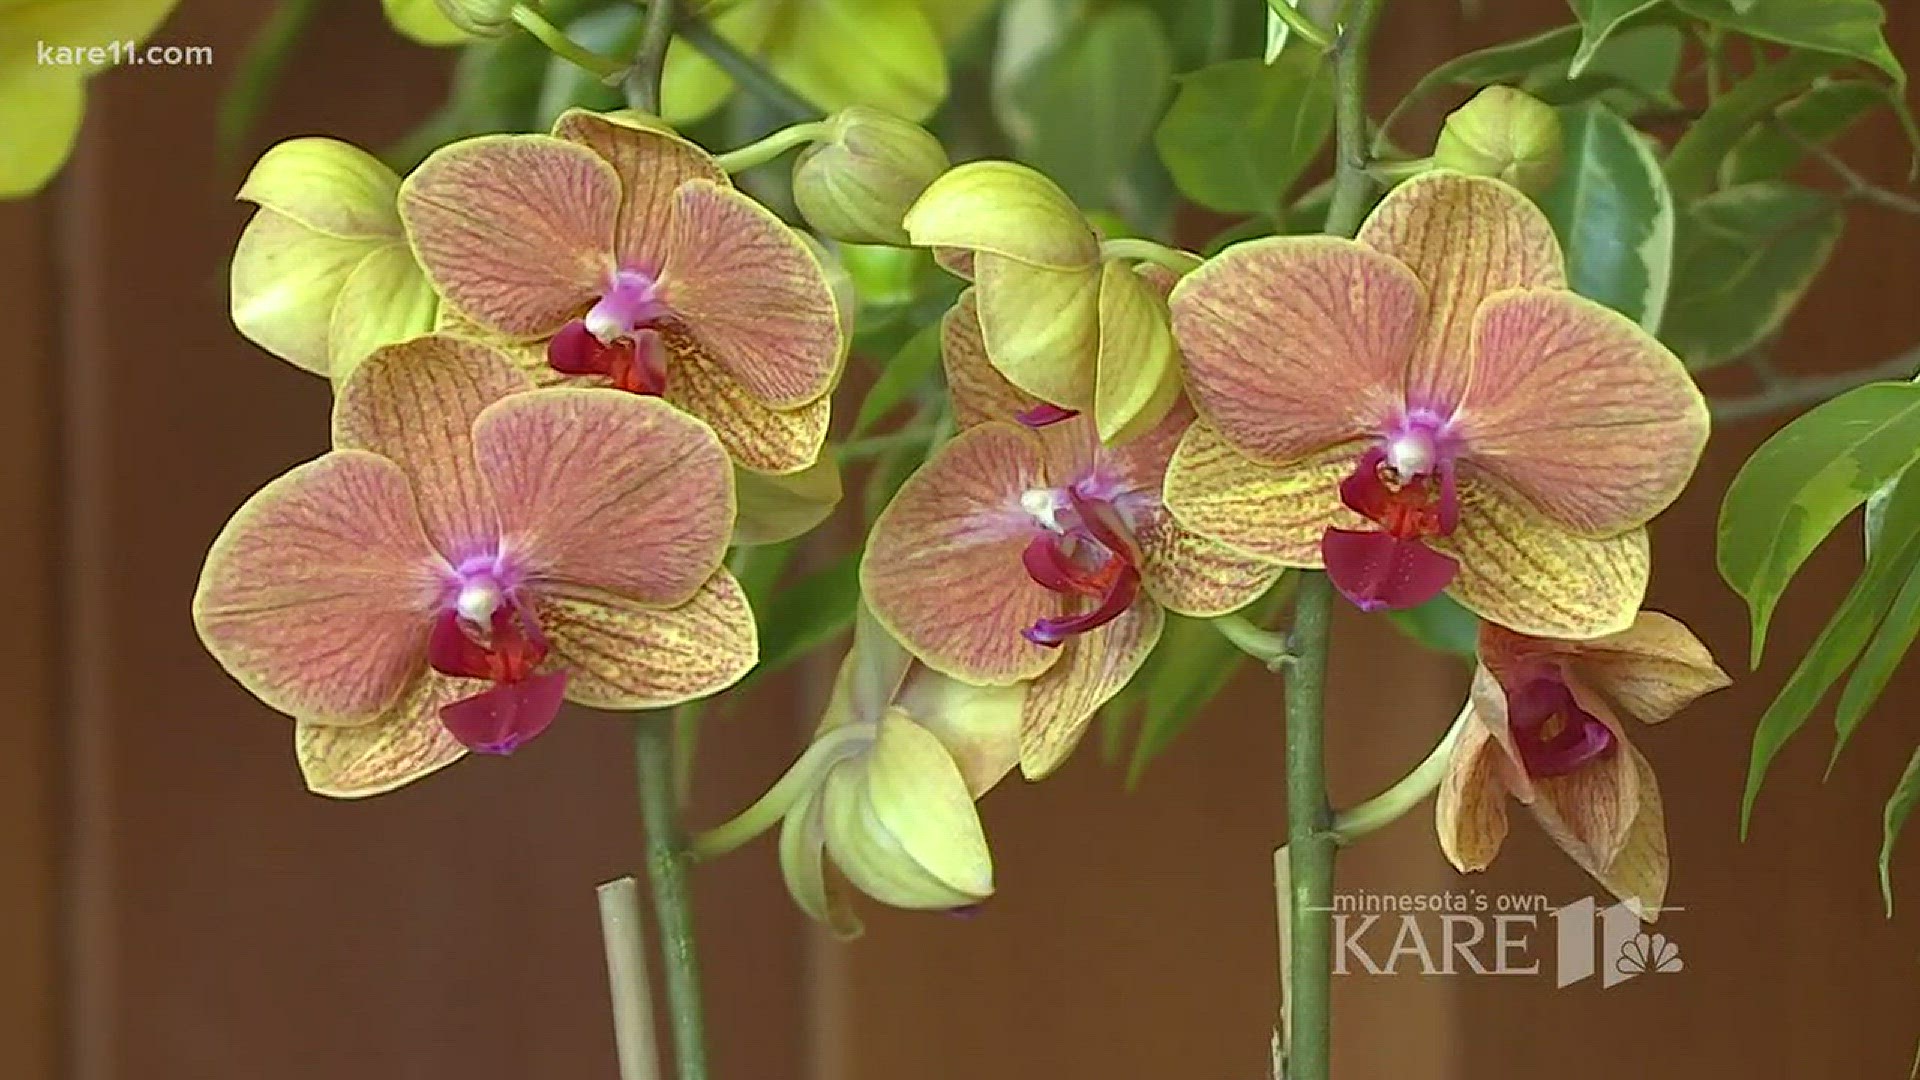 Grow with KARE: Orchids at Arboretum's Spring Flower Show